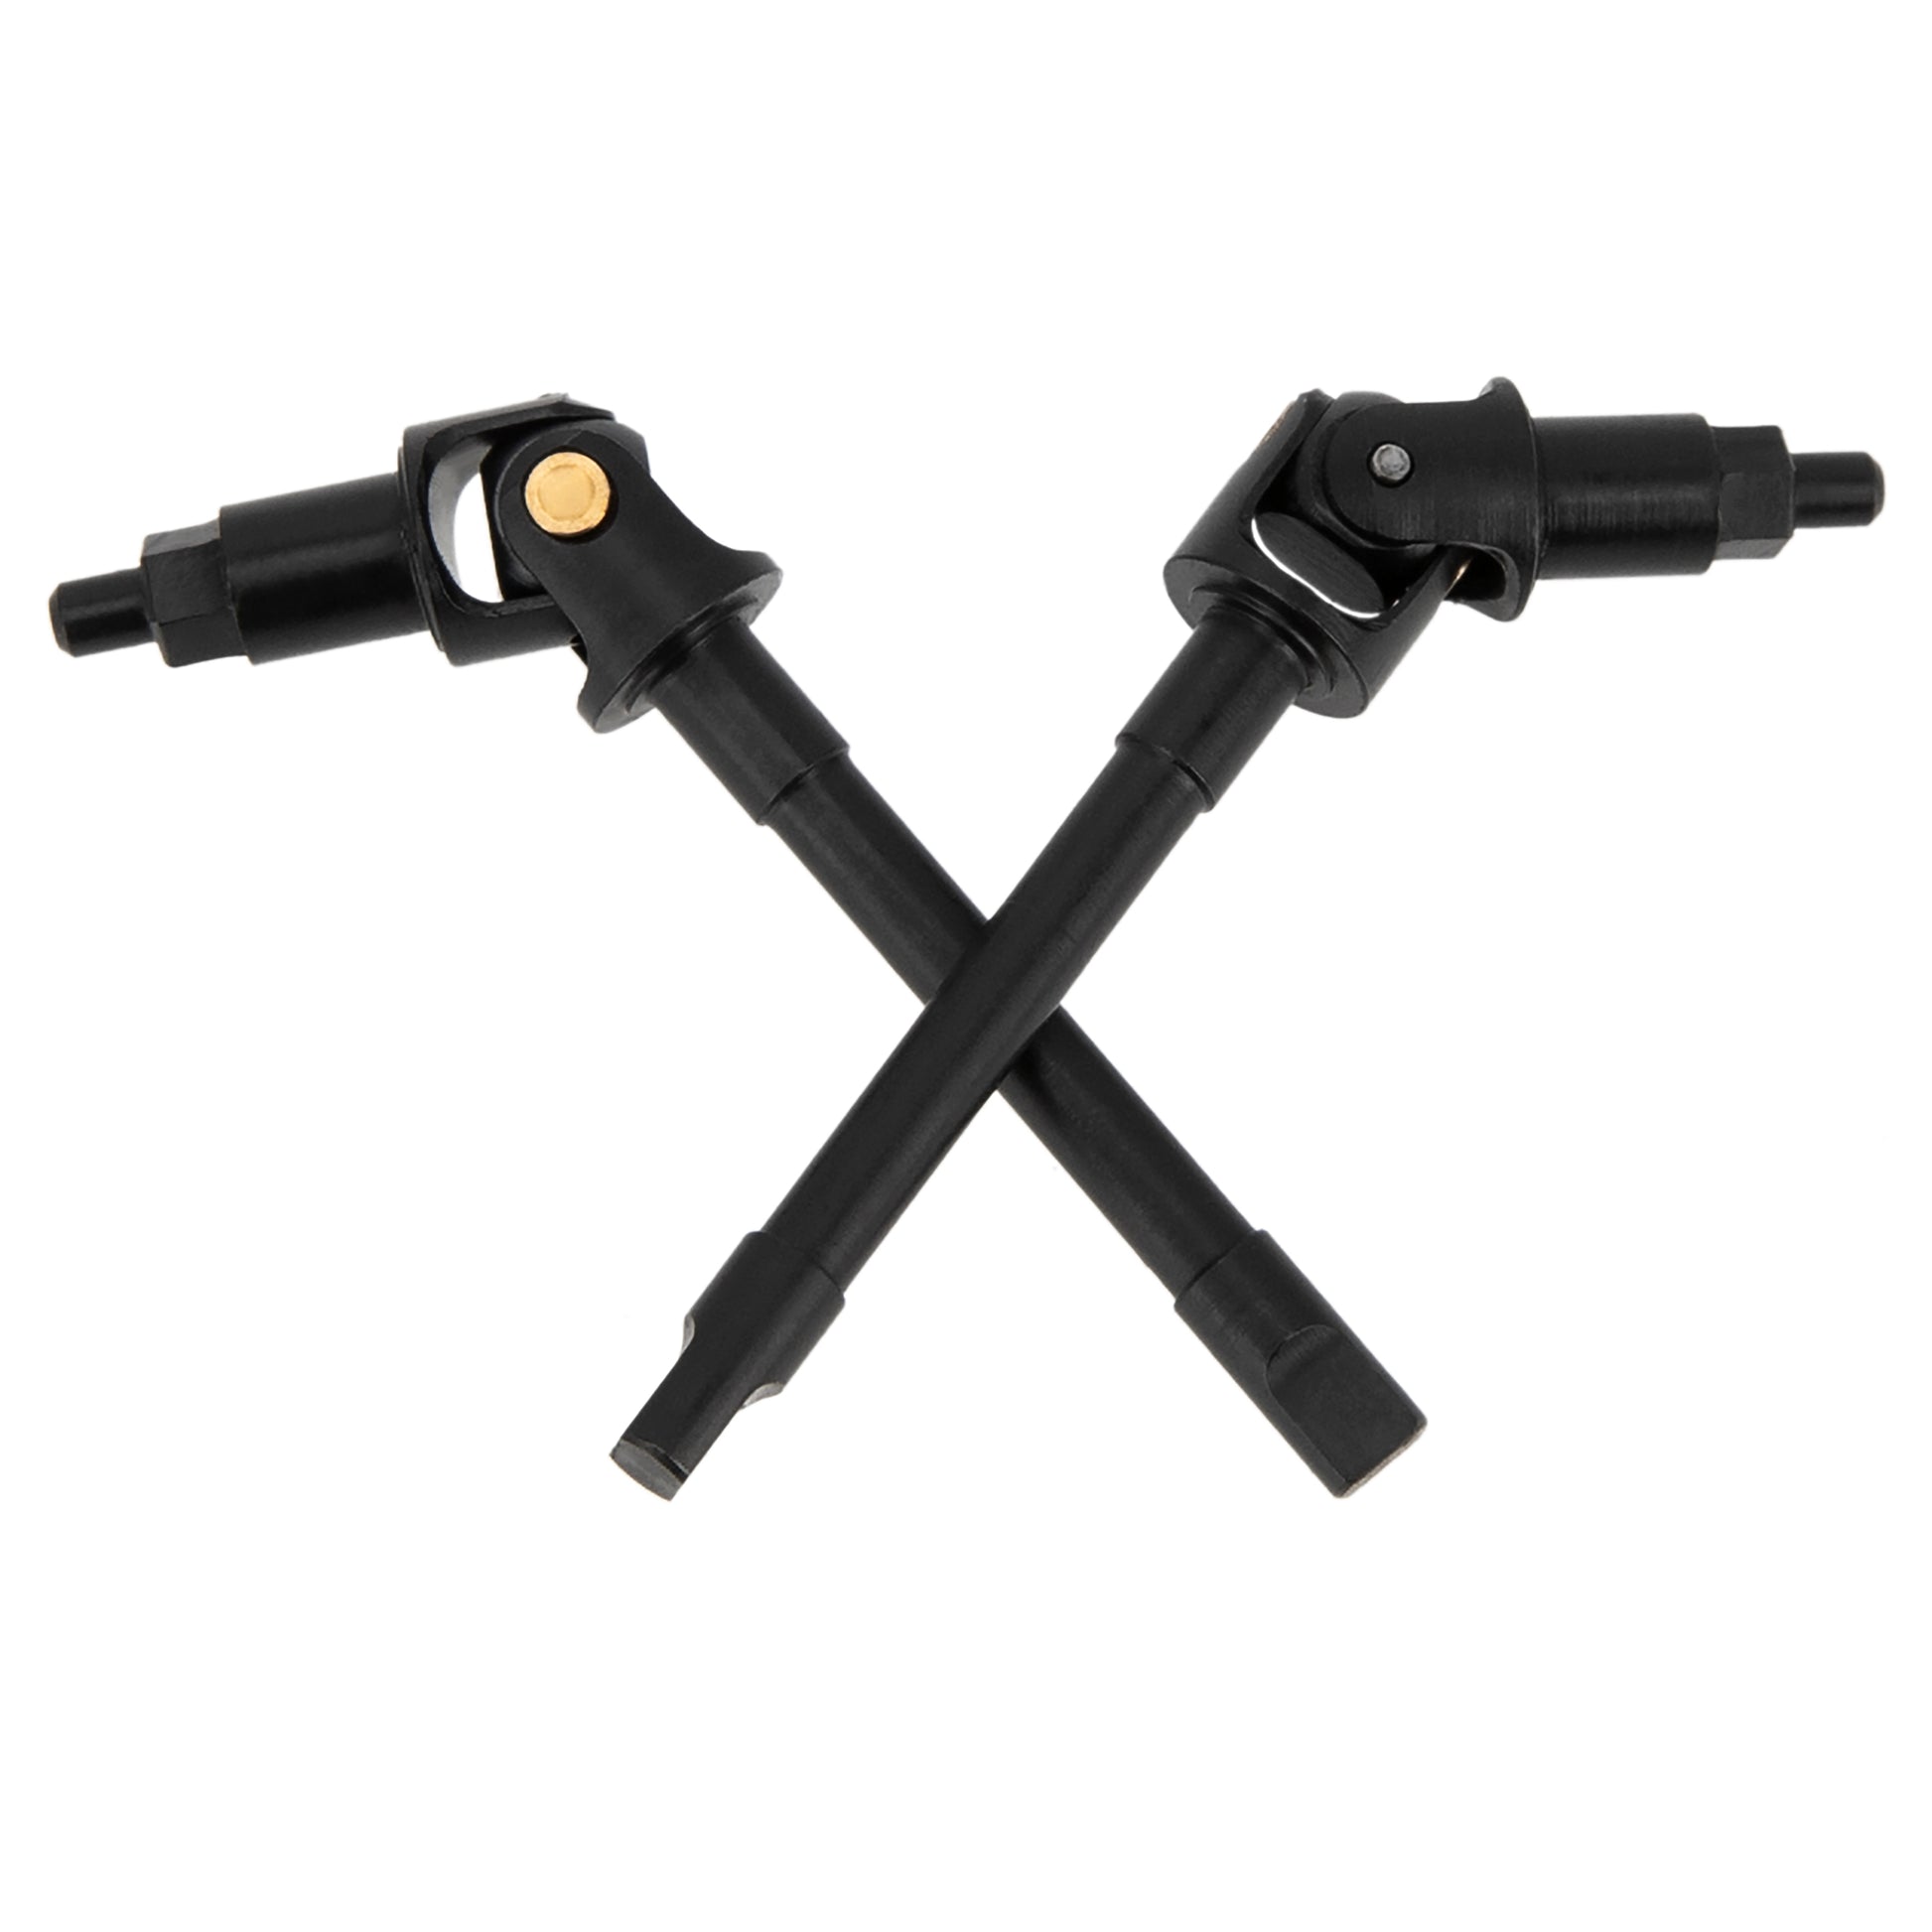 Front Portal Axle Shafts for SCX24